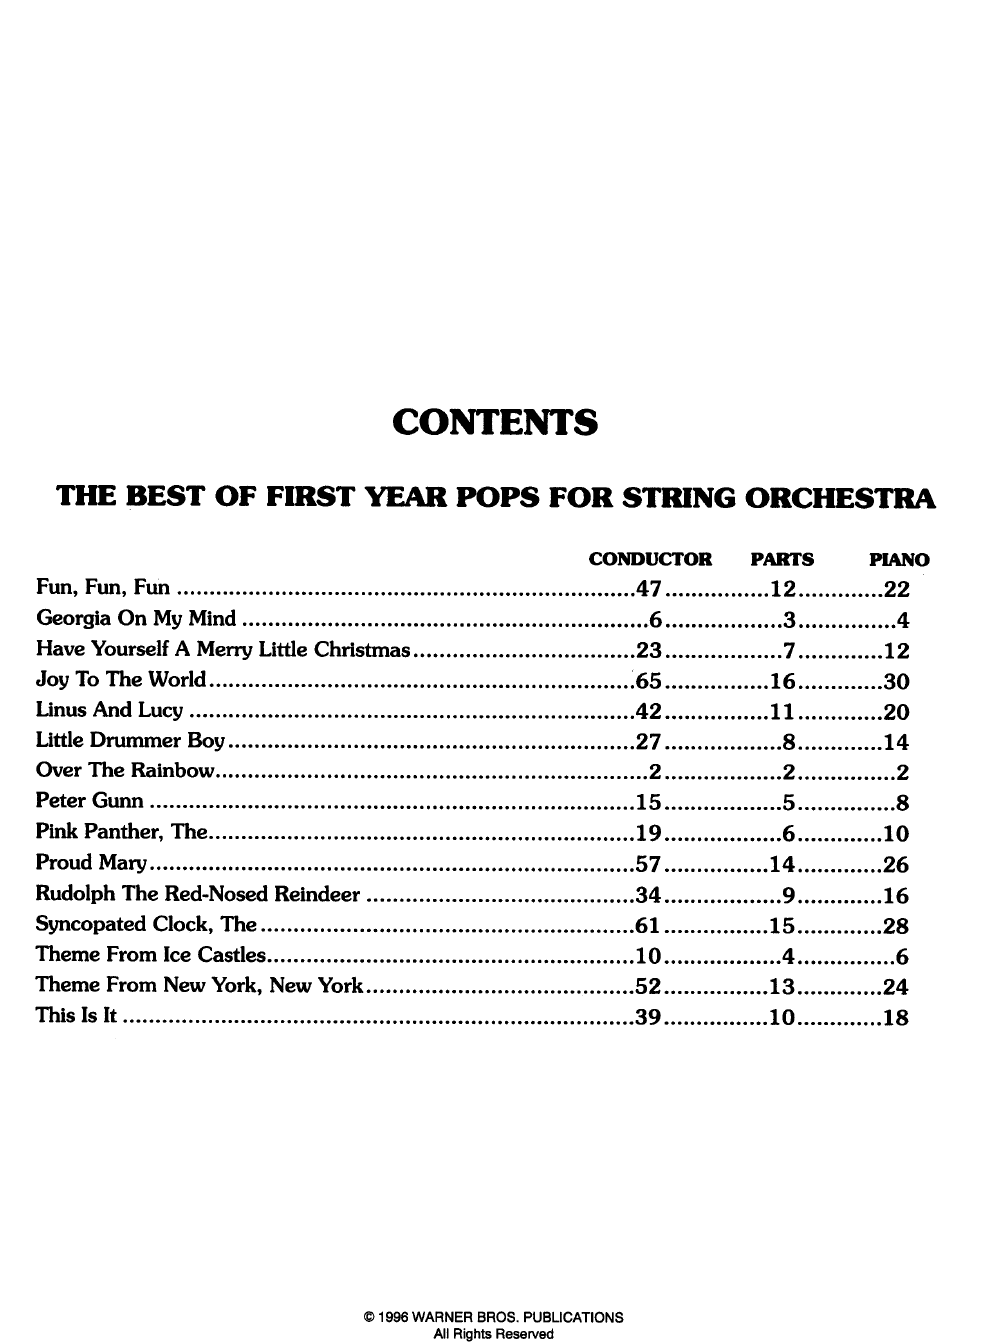 BEST OF FIRST YEAR POPS CONDUCTOR